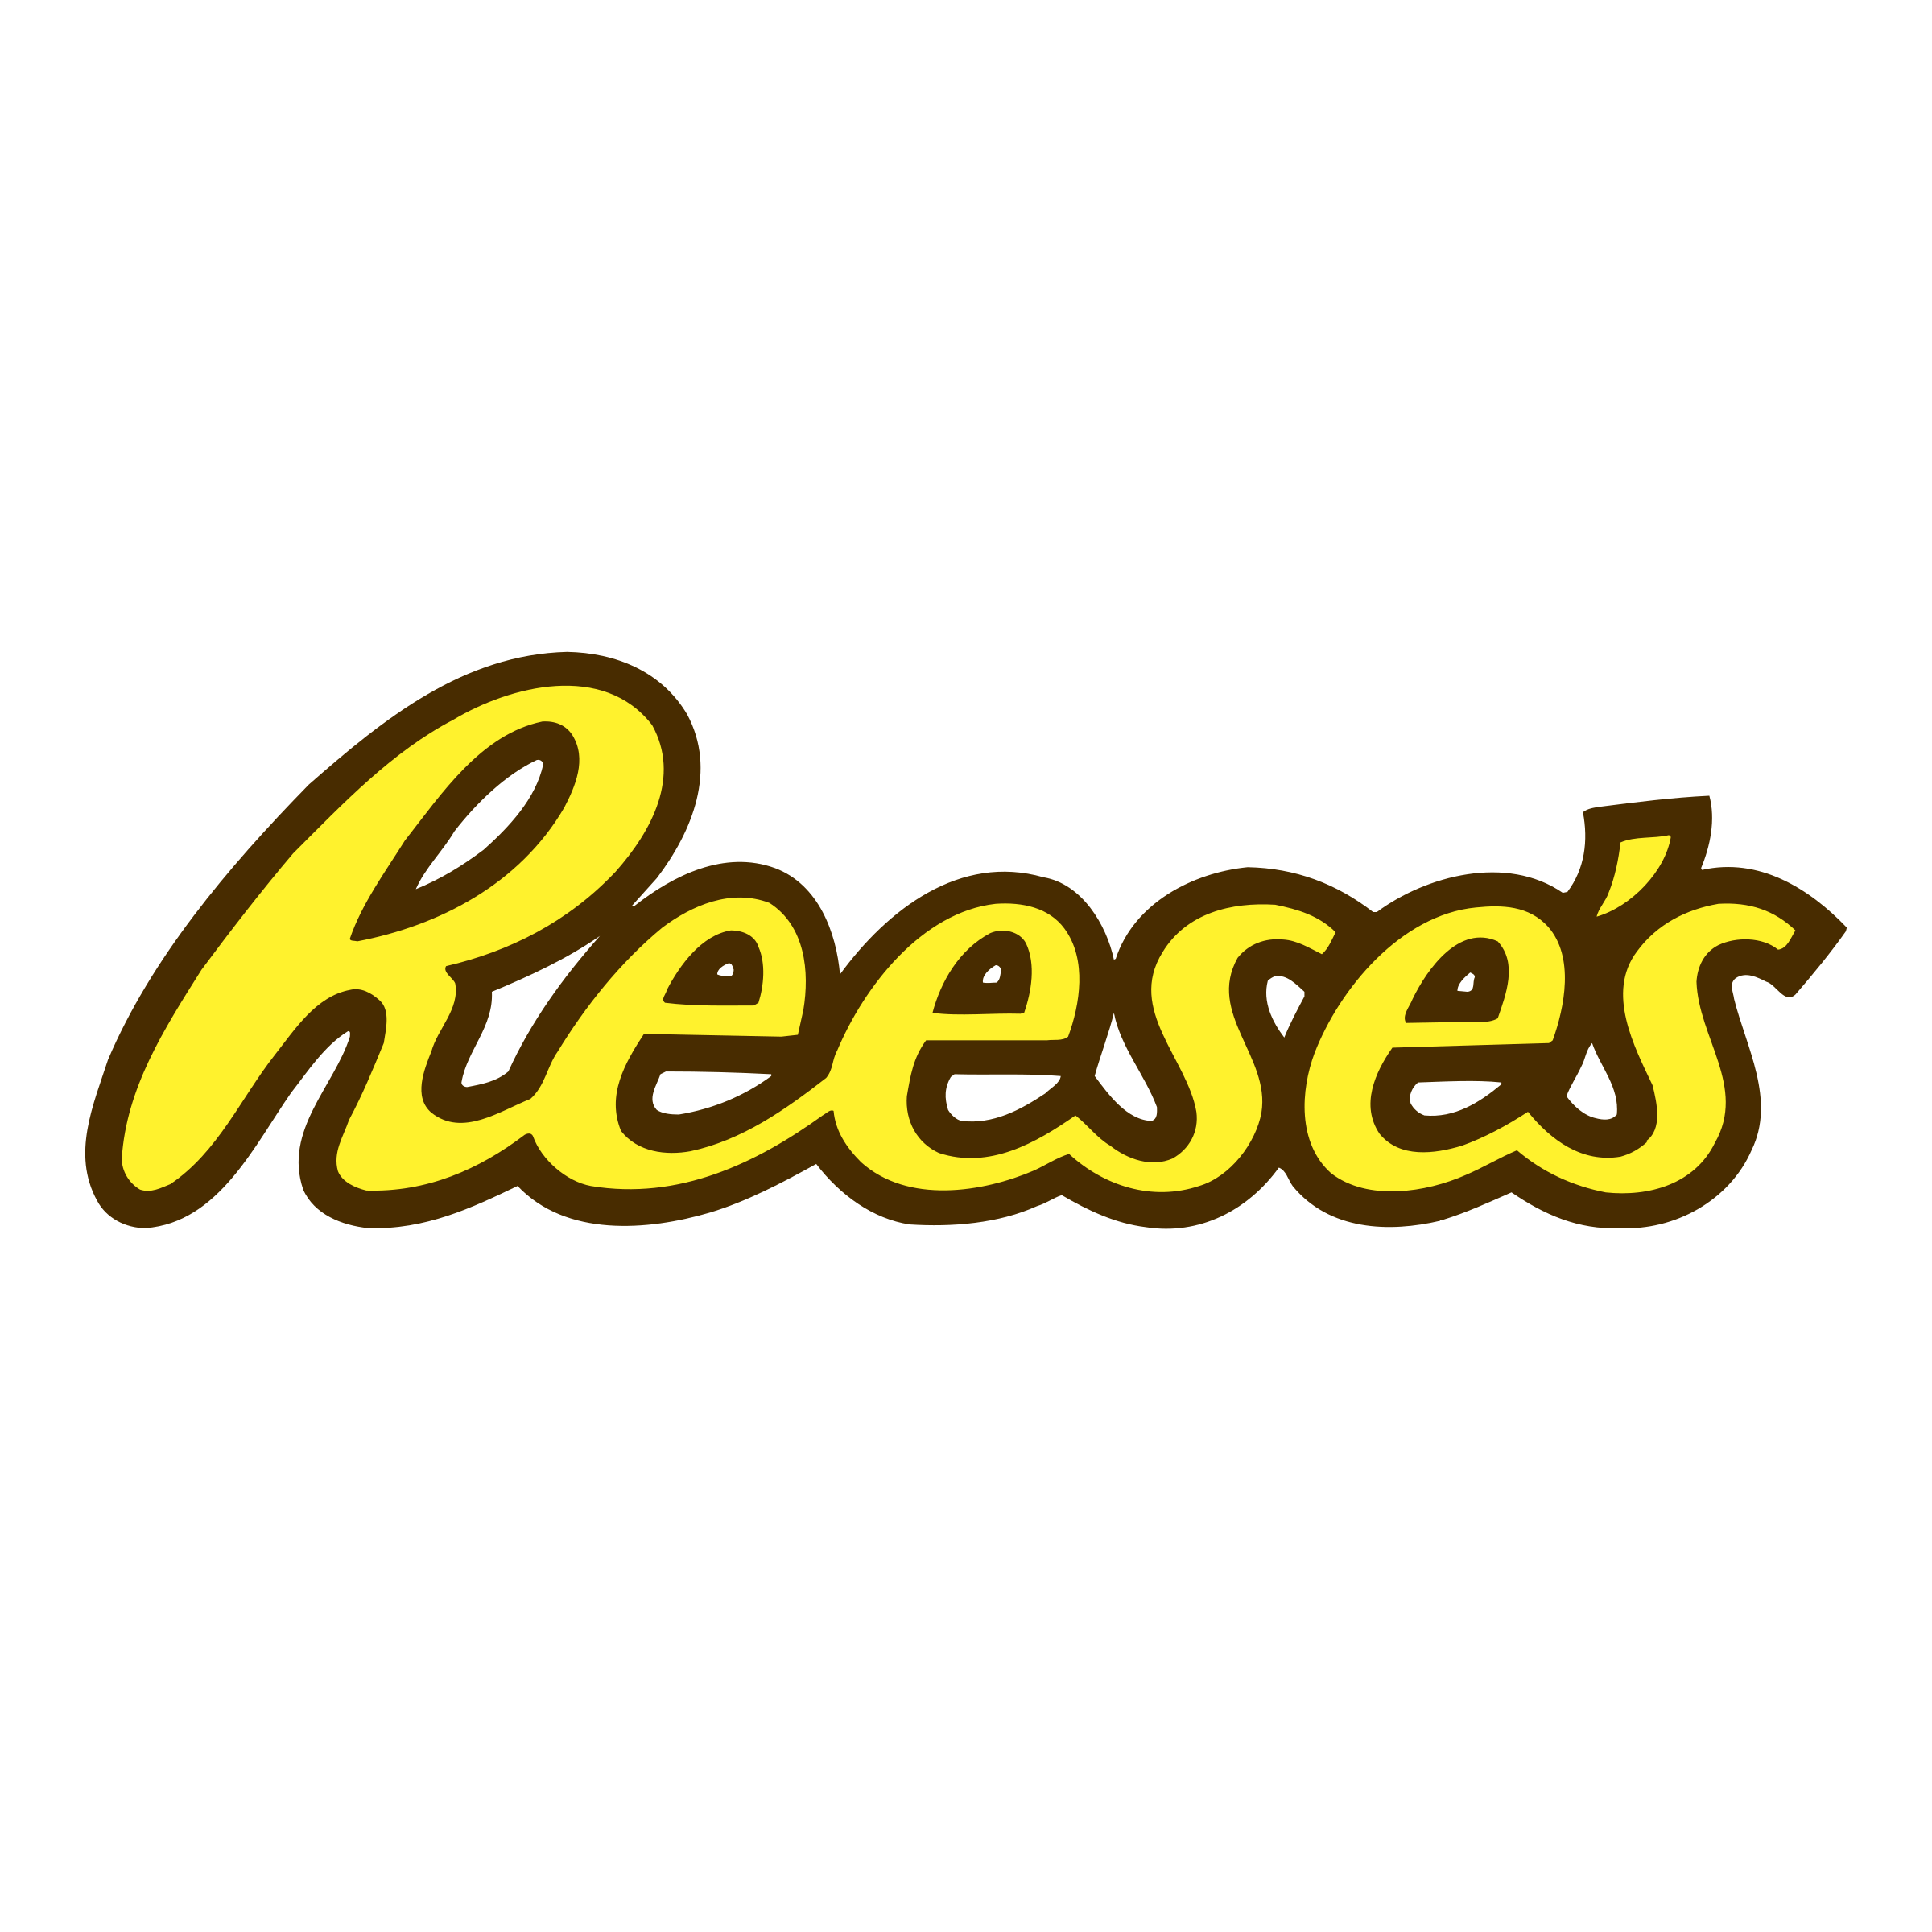 Reese's Logo - Reese's Logo PNG Transparent & SVG Vector